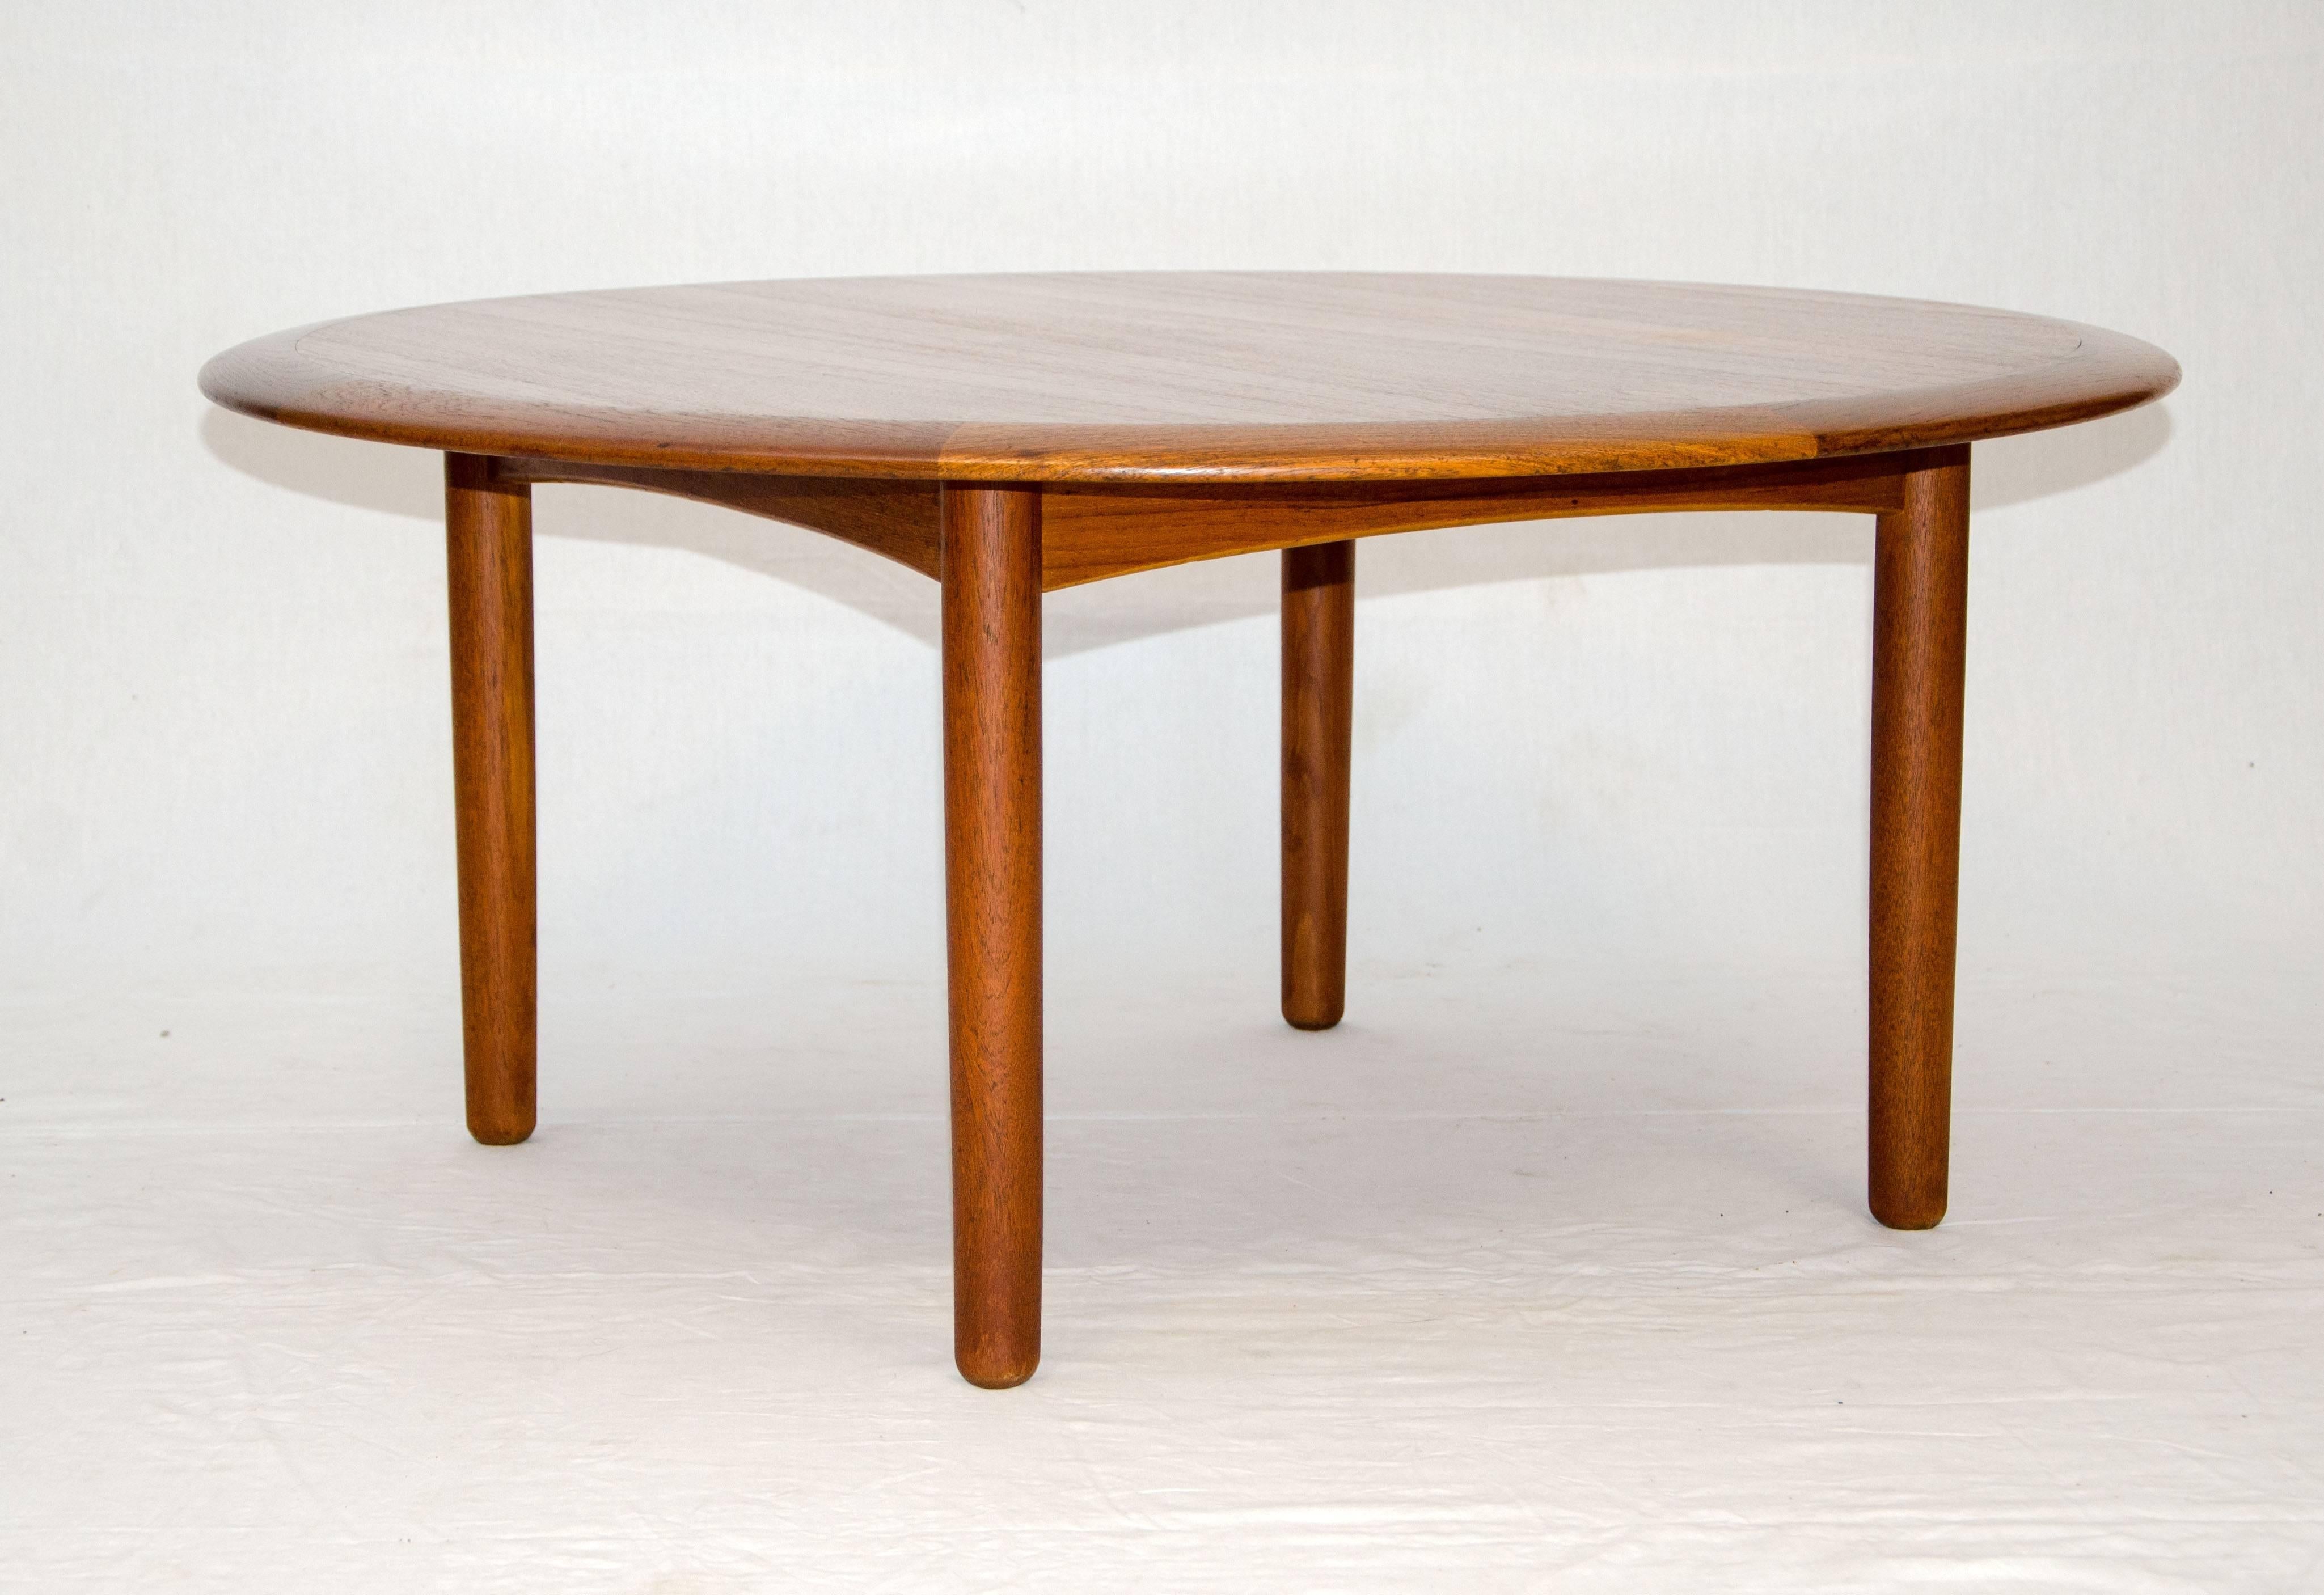 Simple well made Danish teak circular coffee table on round legs and accented by an opposite grain pattern border around the edge of the tabletop. Retains the manufacturer stamp and a Danish control tag.